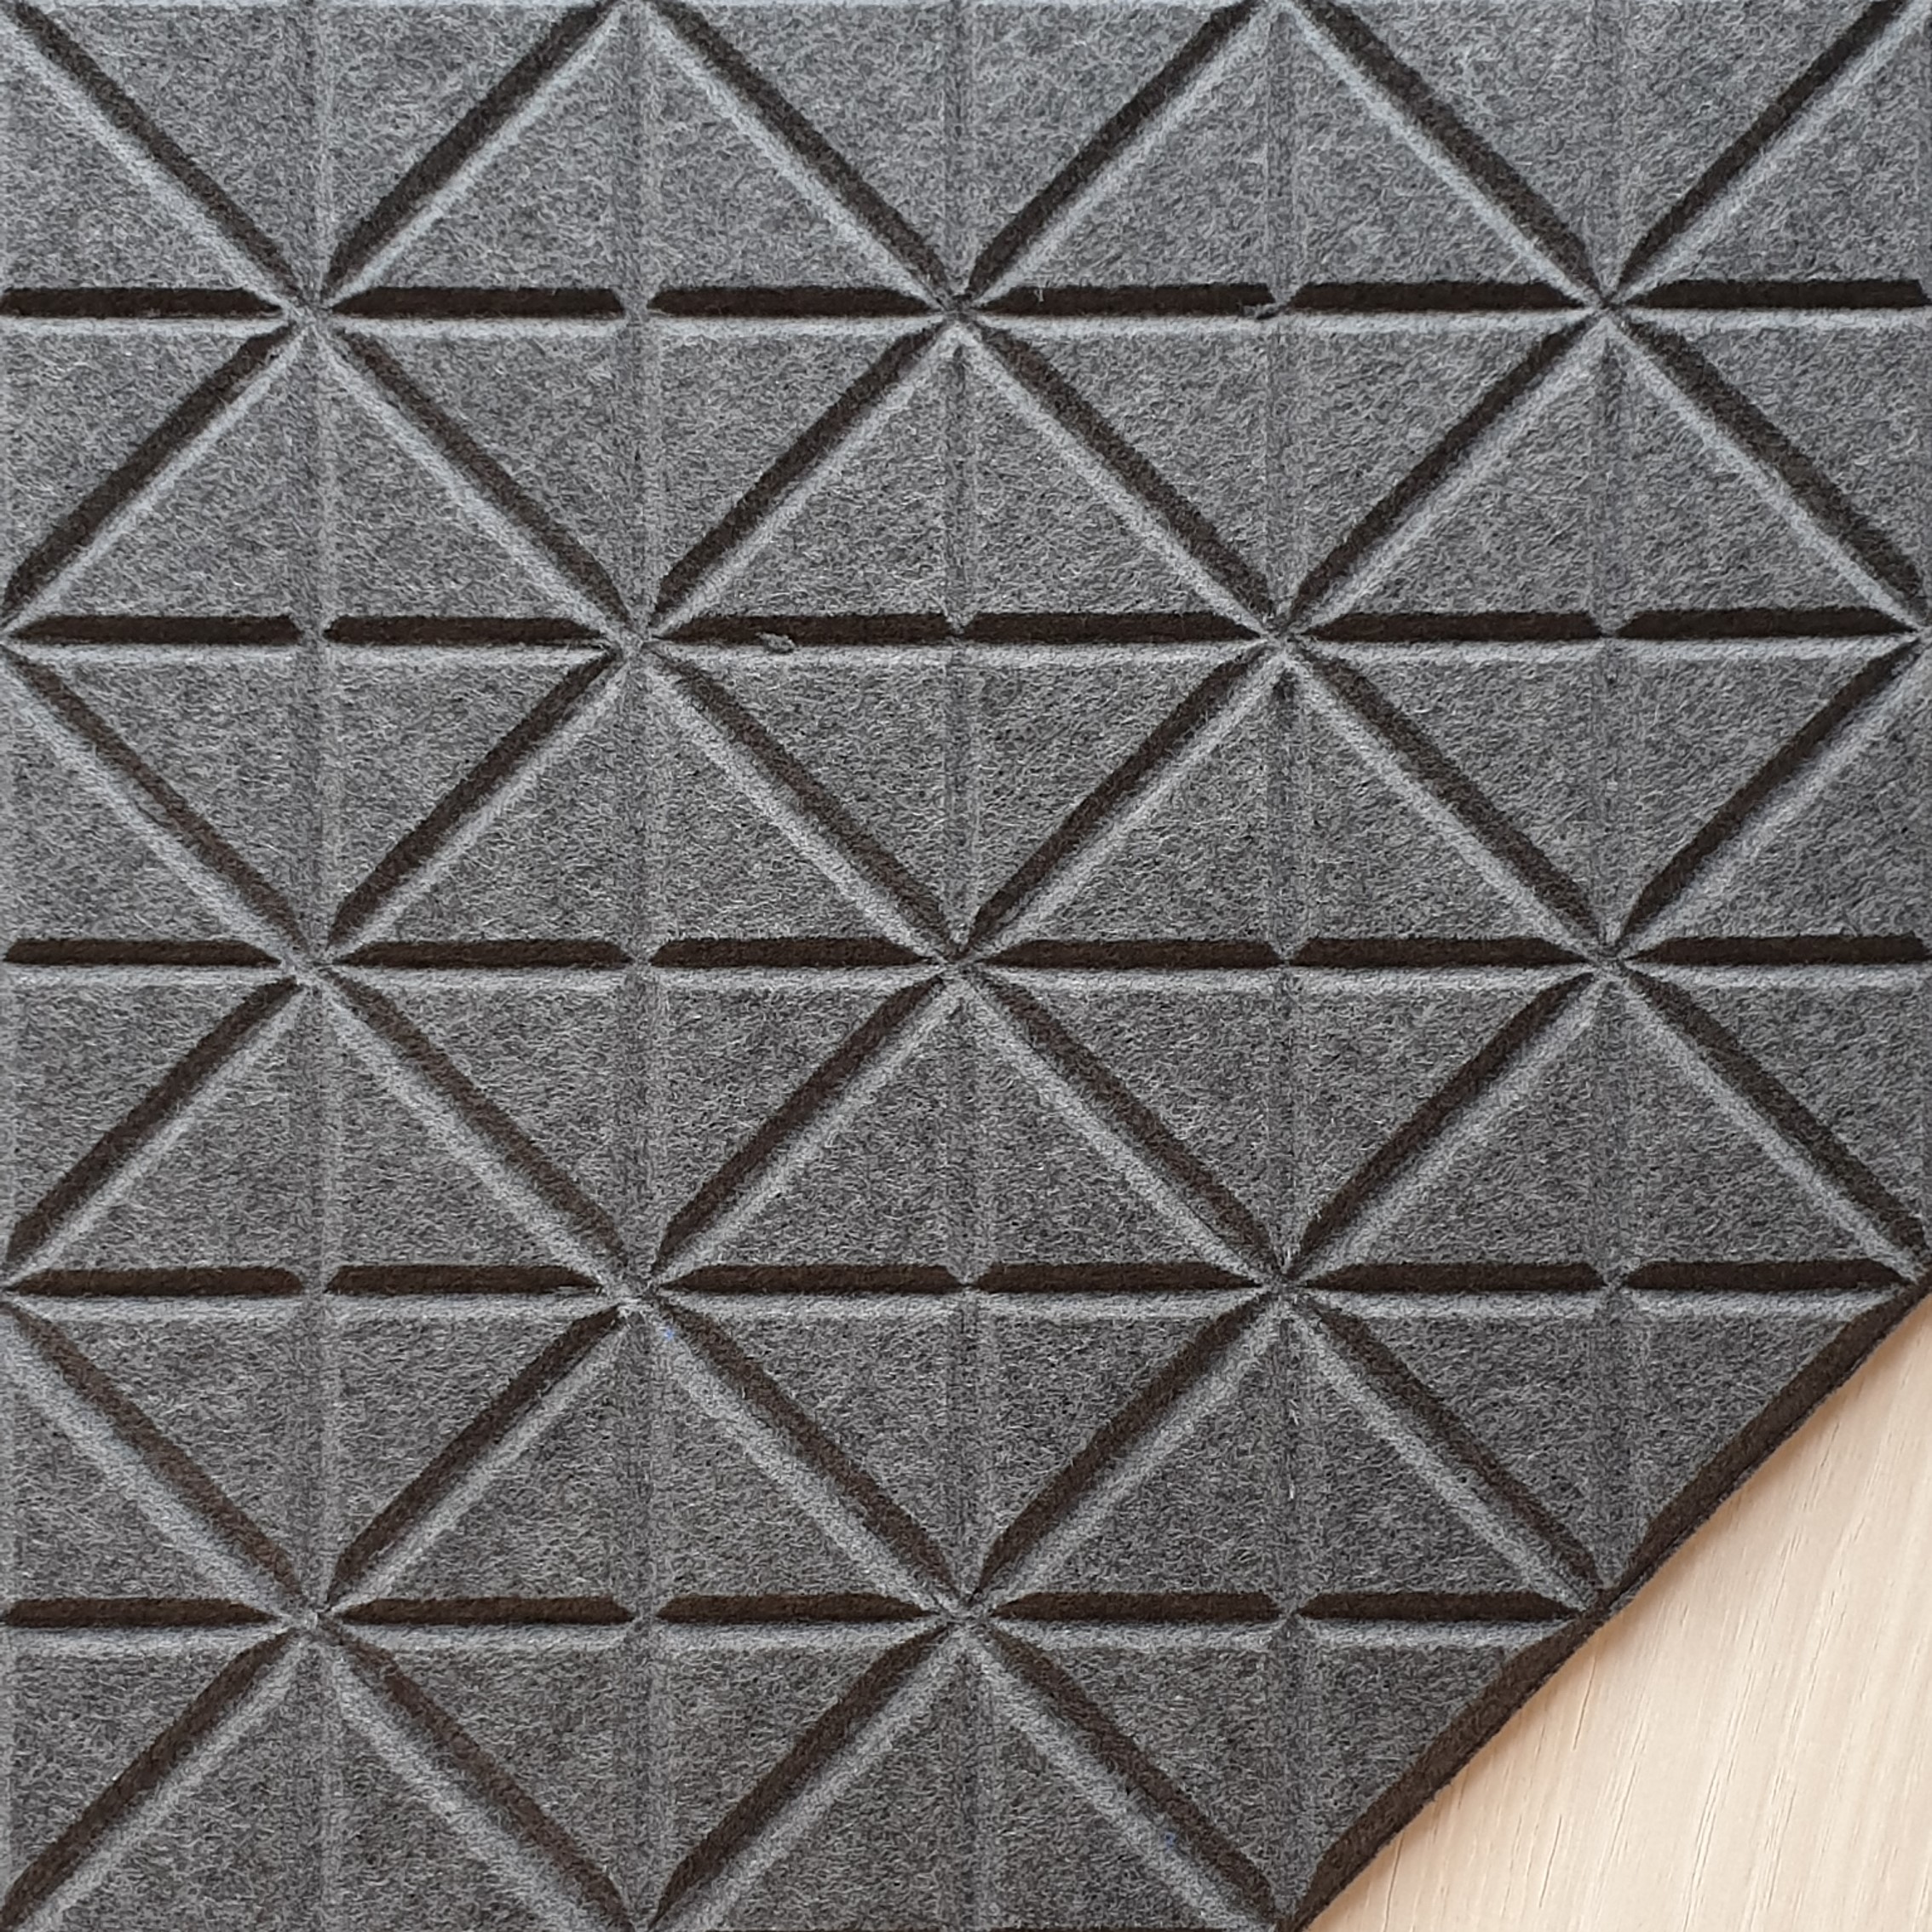 Charcoal Grey Acoustic Board with V-Groove Pattern